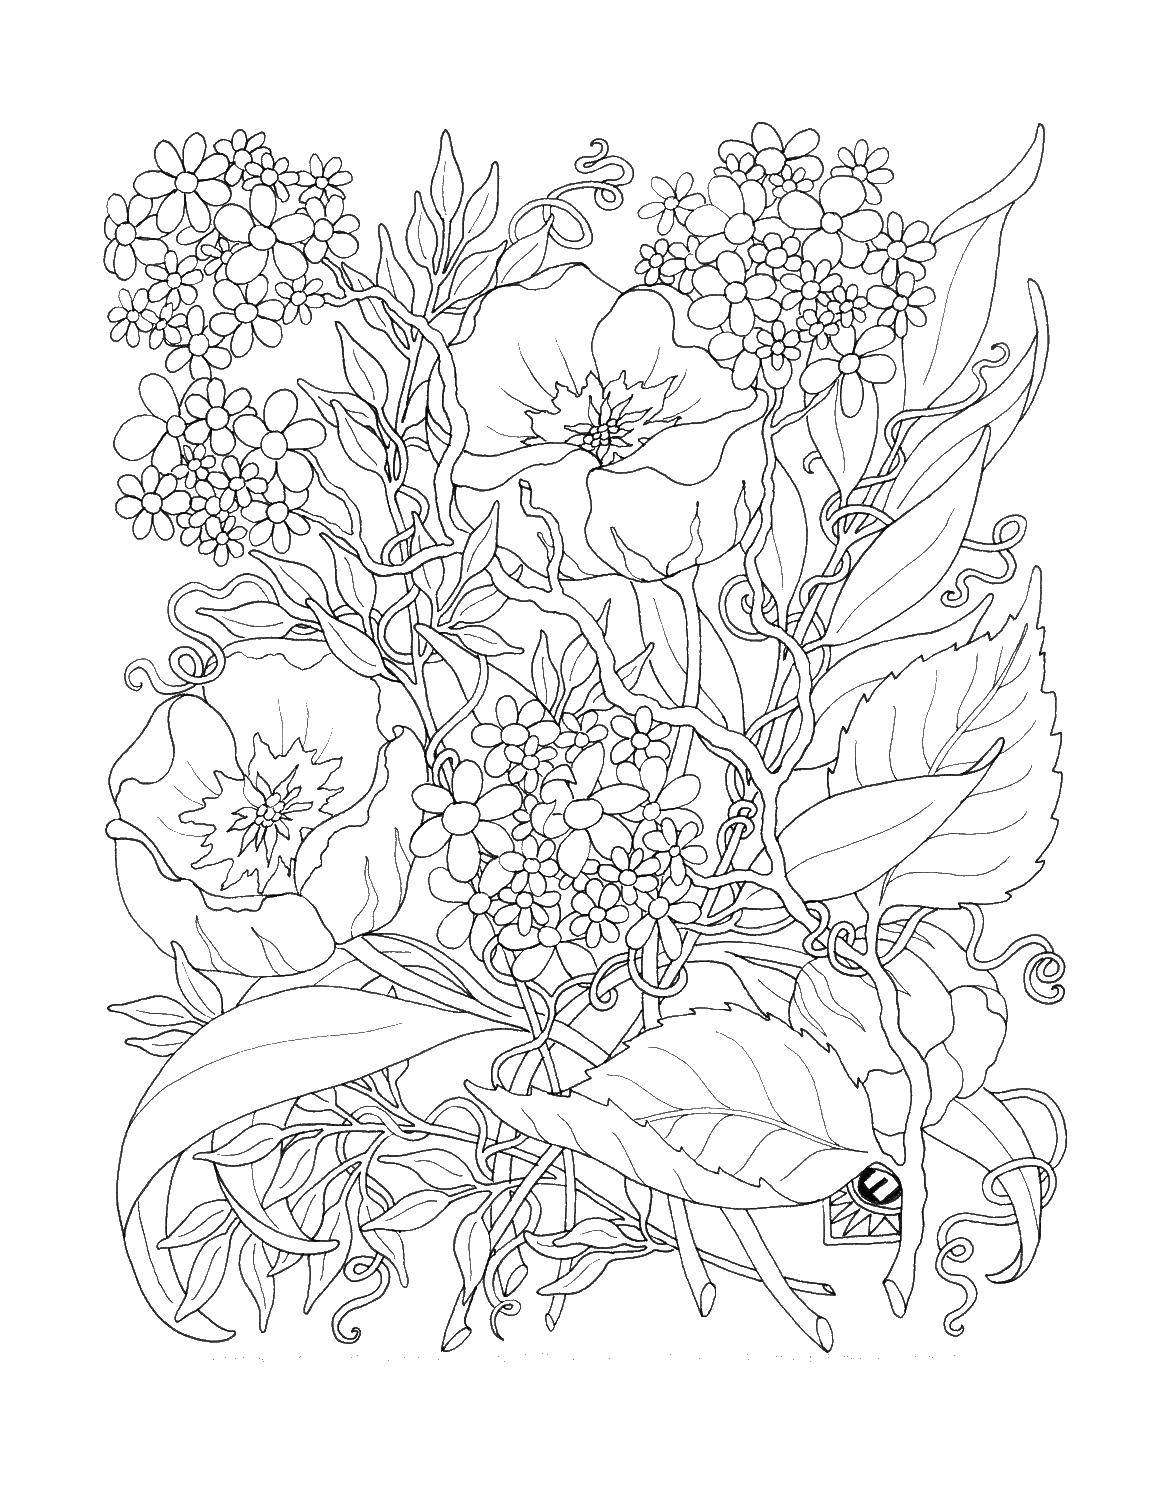 Coloring Flowers and leaves. Category flowers. Tags:  flowers, flowers, leaves, plants.